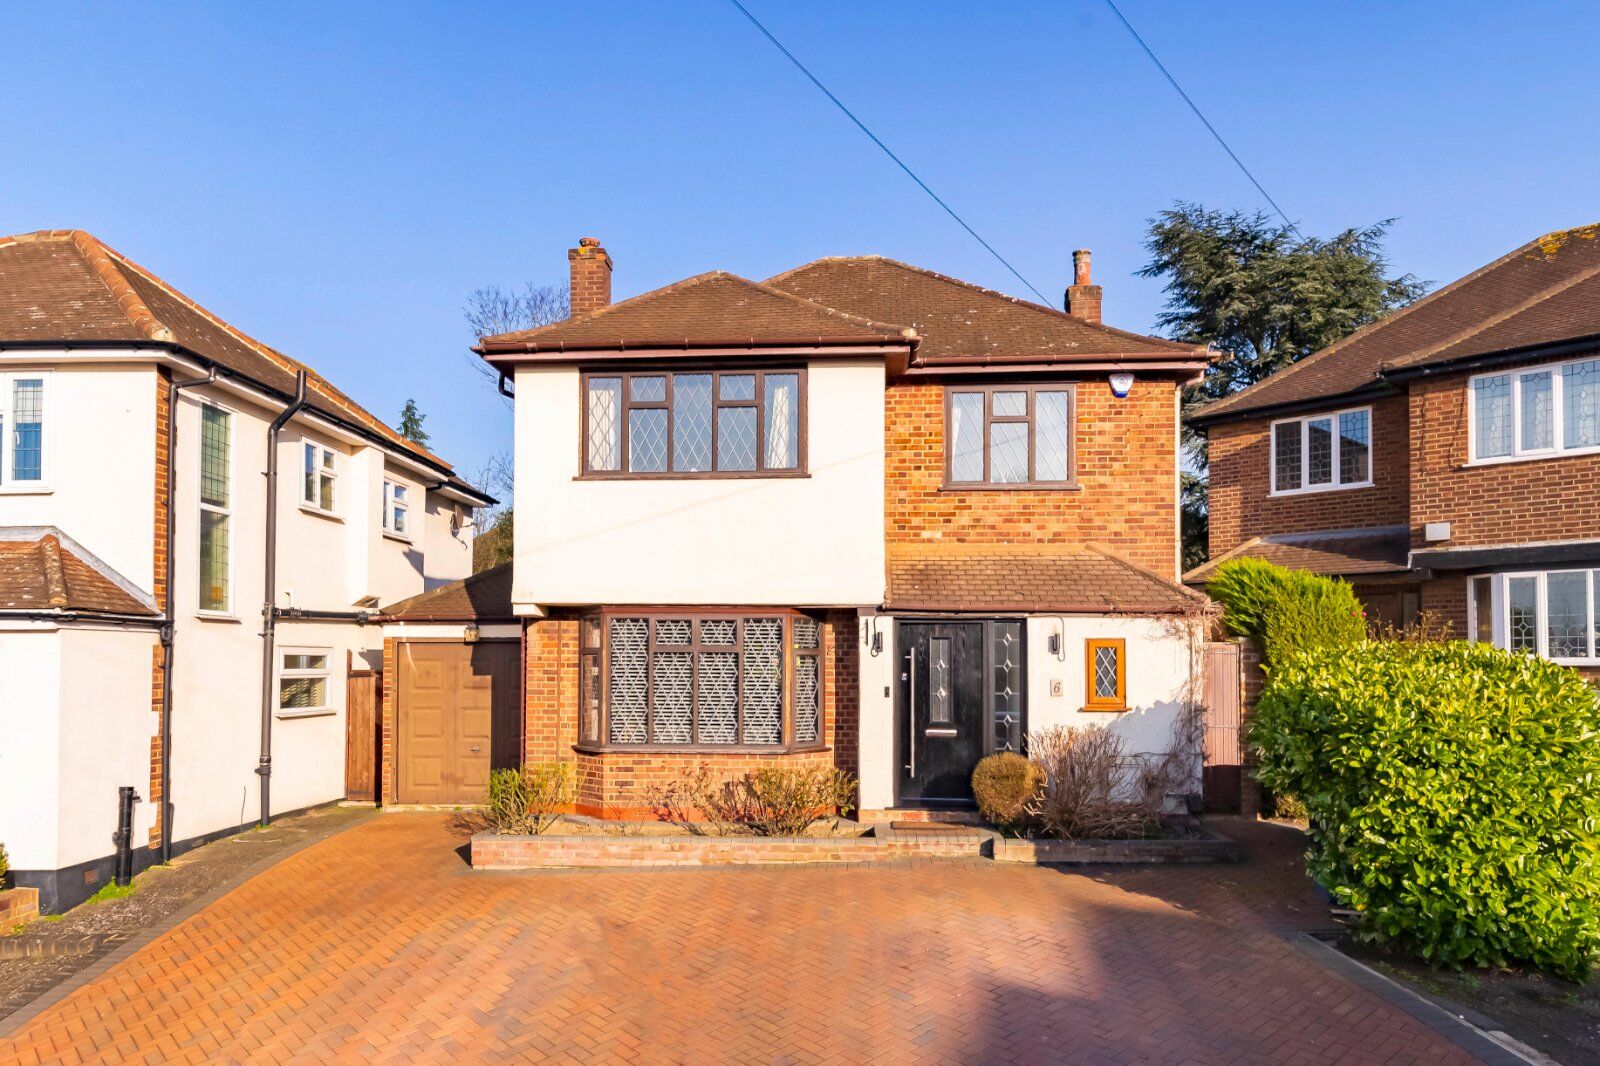 3 bedroom detached house for sale Dacre Close, Chigwell, IG7, main image